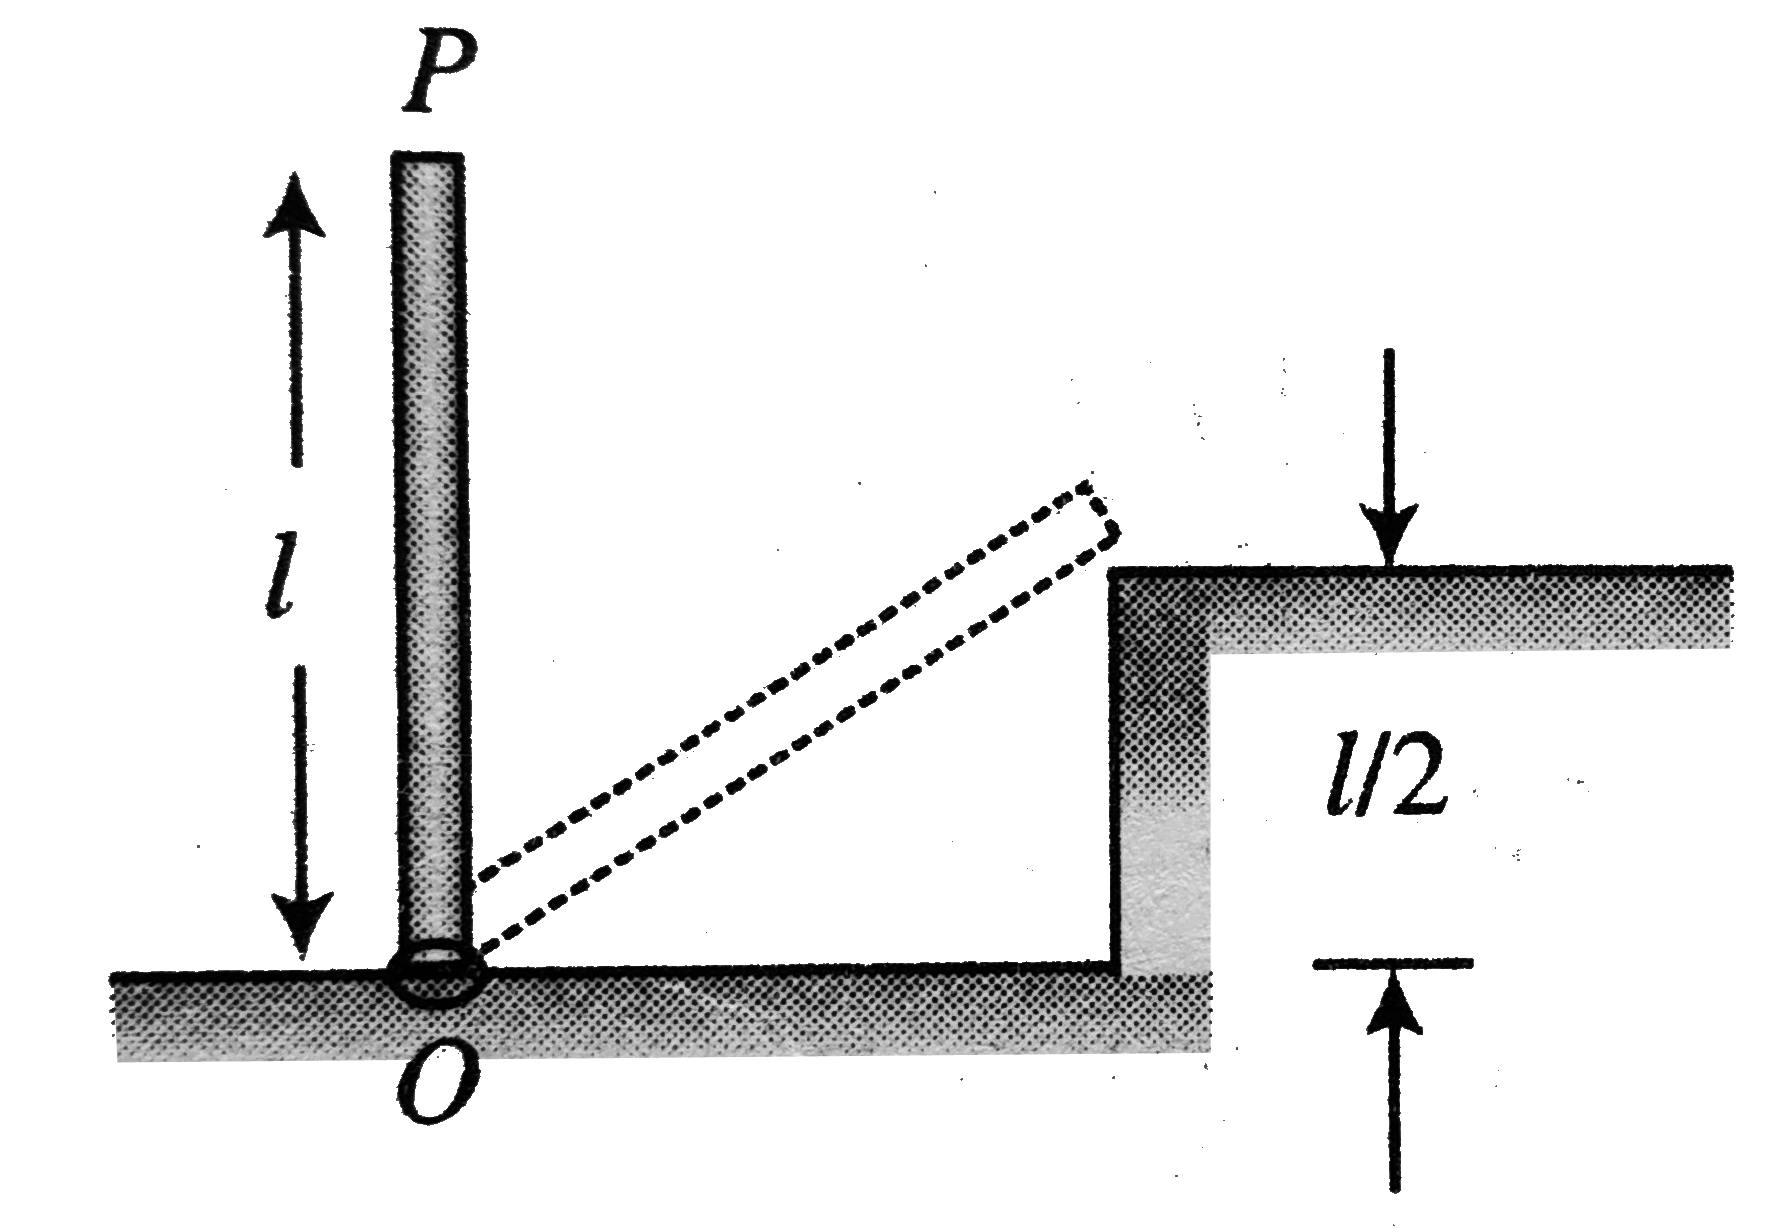 A uniform rod of mass m and length l is released from rest from its vertical position by giving a gently push. In consequence, the end of the rod collides at P after rotating about the smooth horizontal axis O. If the coefficient of restitution e = (1/2). Find the: a. angular speed of the rod just after the impact.      b. energy loss during collision. c. maximum angle rotated collision.